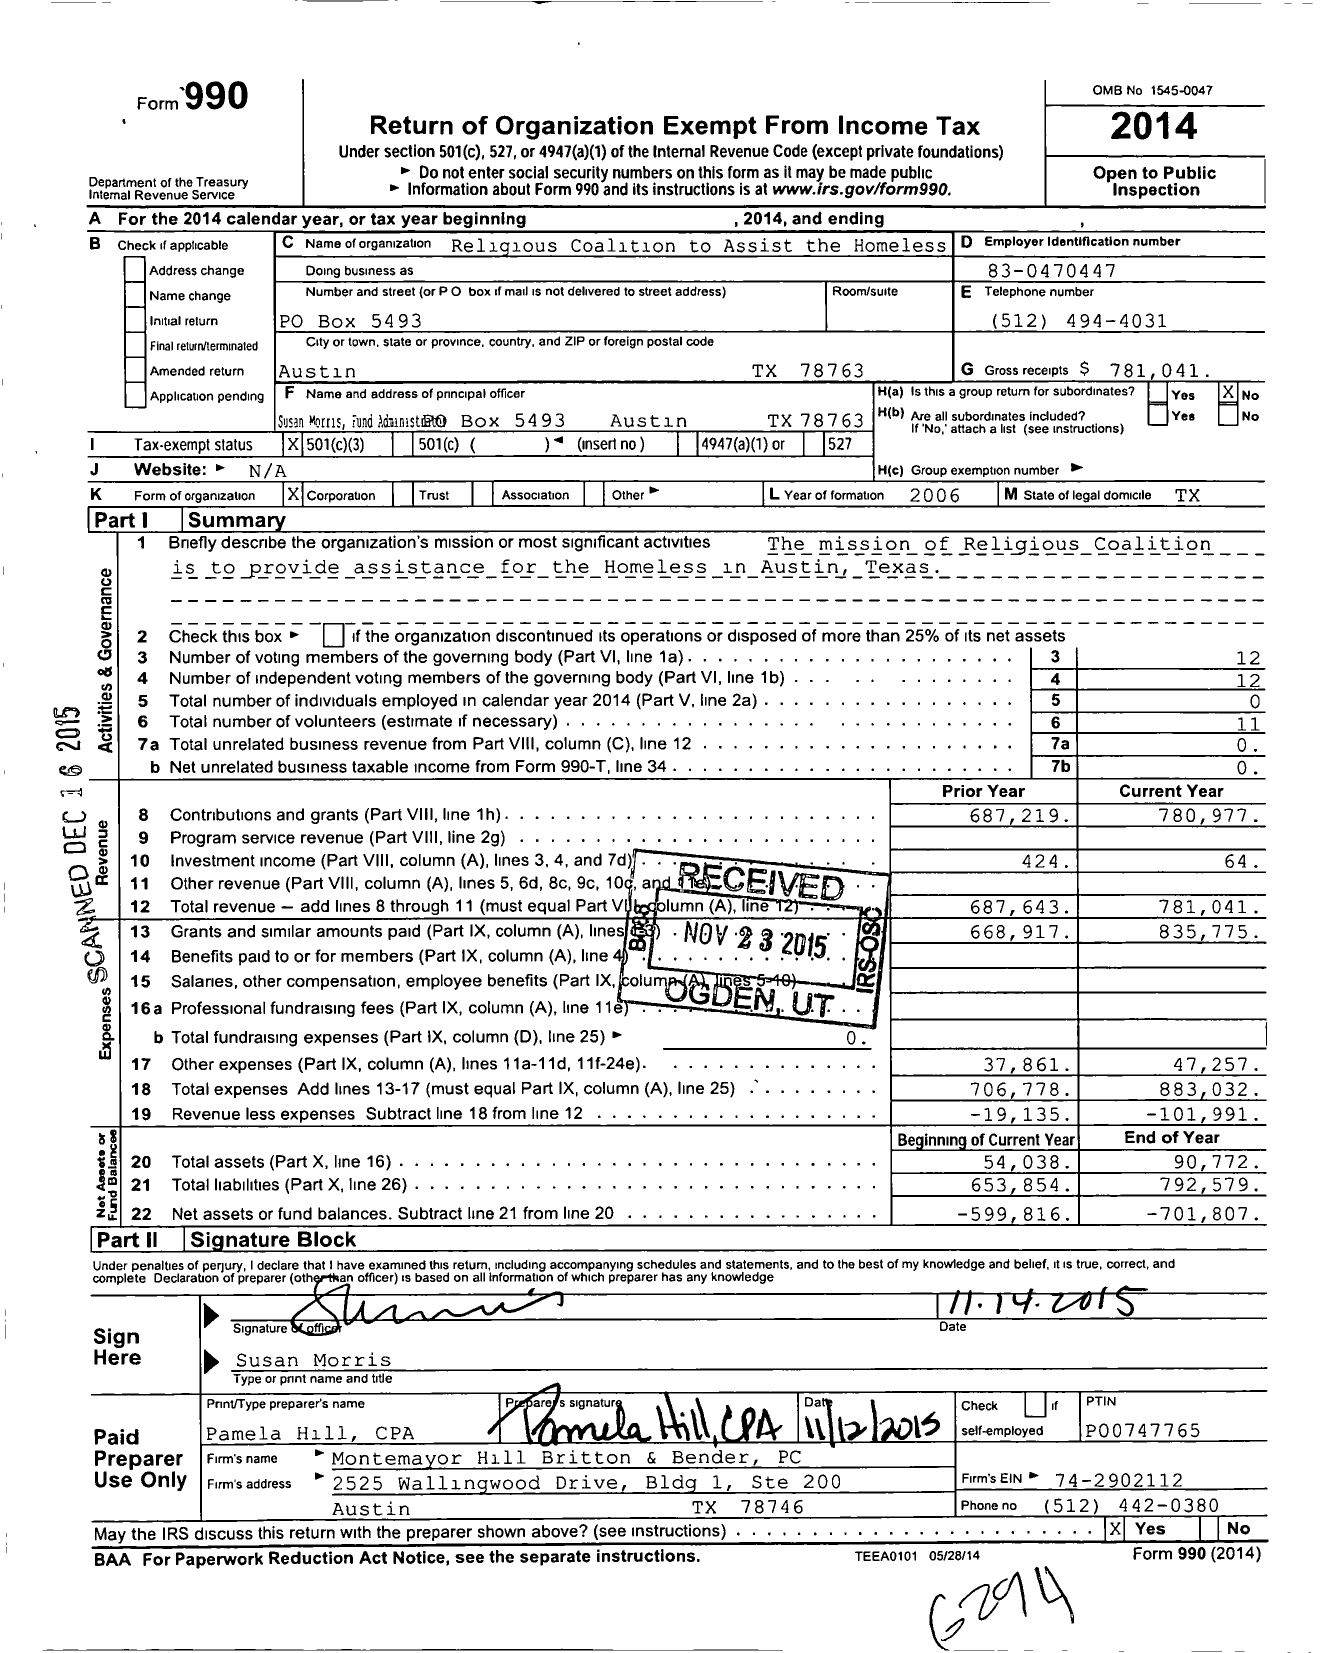 Image of first page of 2014 Form 990 for Religious Coalition to Assist the Homeless (RCAH)